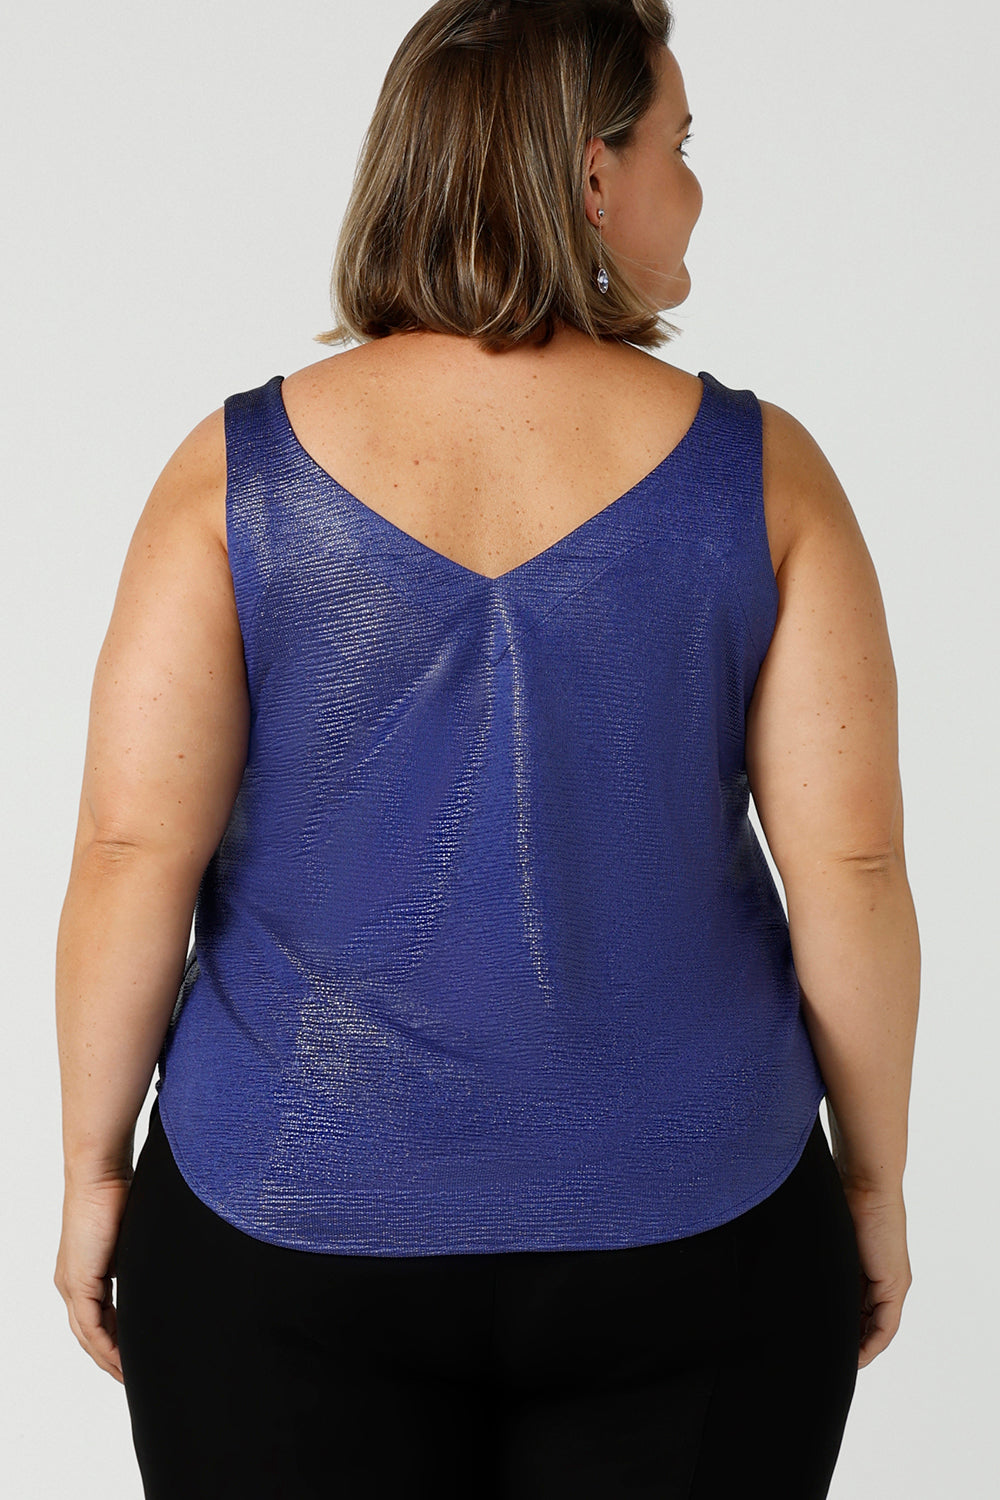 Back view of a plus size 18, fuller figure woman wearing a cobalt Xanadu cami top with wide shoulder straps. Made in Australia by Australian and New Zealand women's clothing company, this shimmer jersey top wears well with evening and occasion-wear skirts, pants and suit jackets.